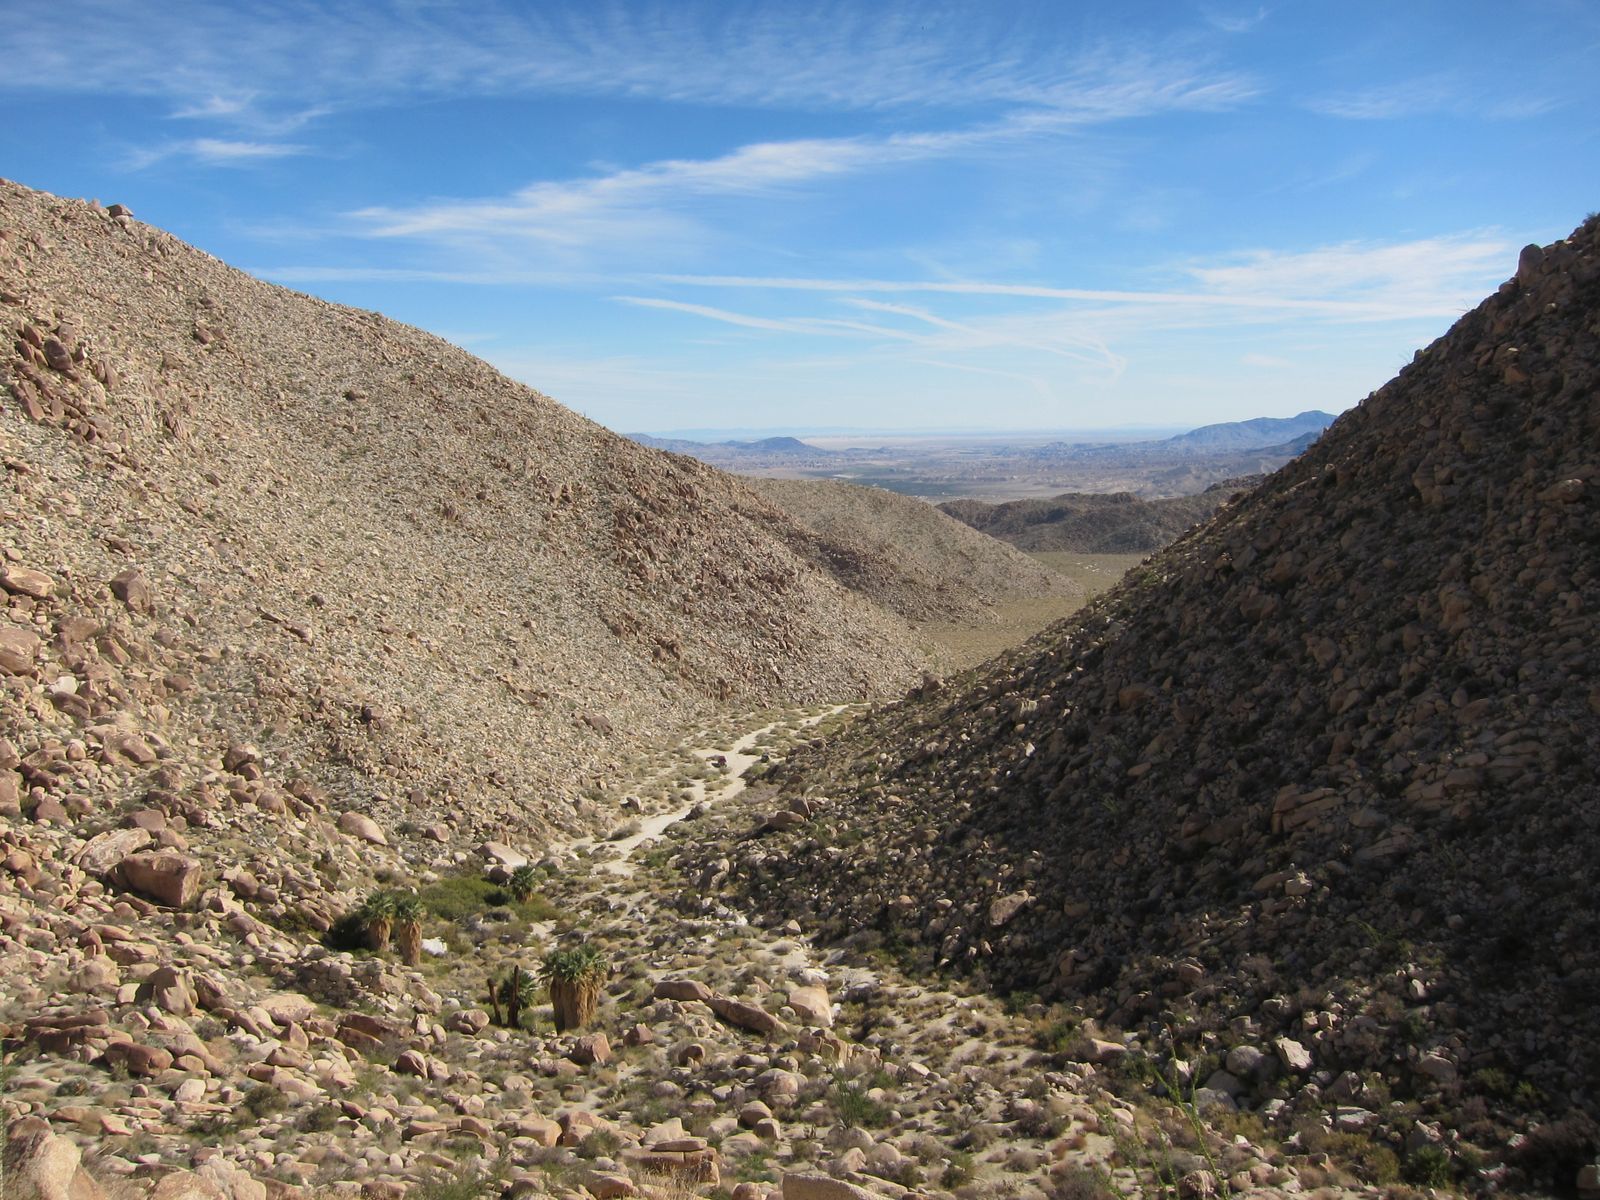 Looking back down into the South Fork of Indian Valley.